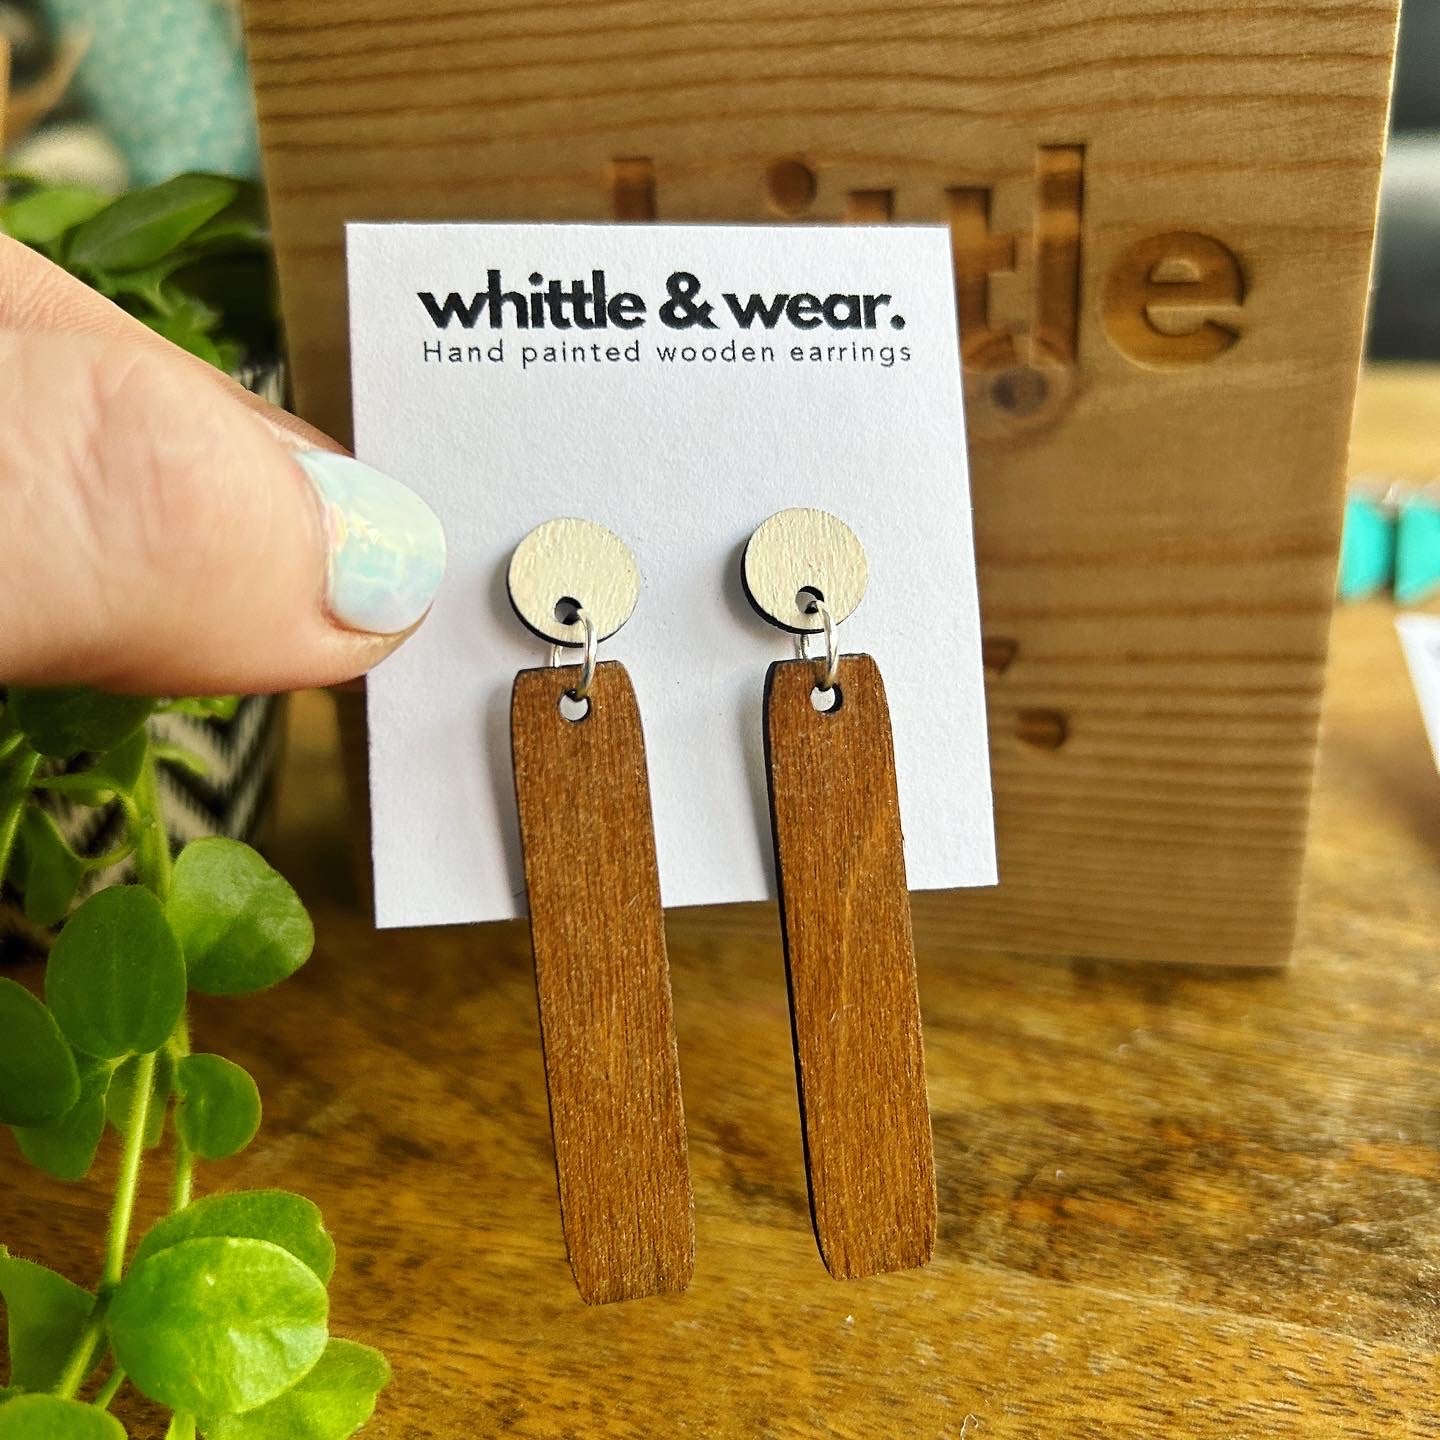 Hand painted wooden dangles. Straight